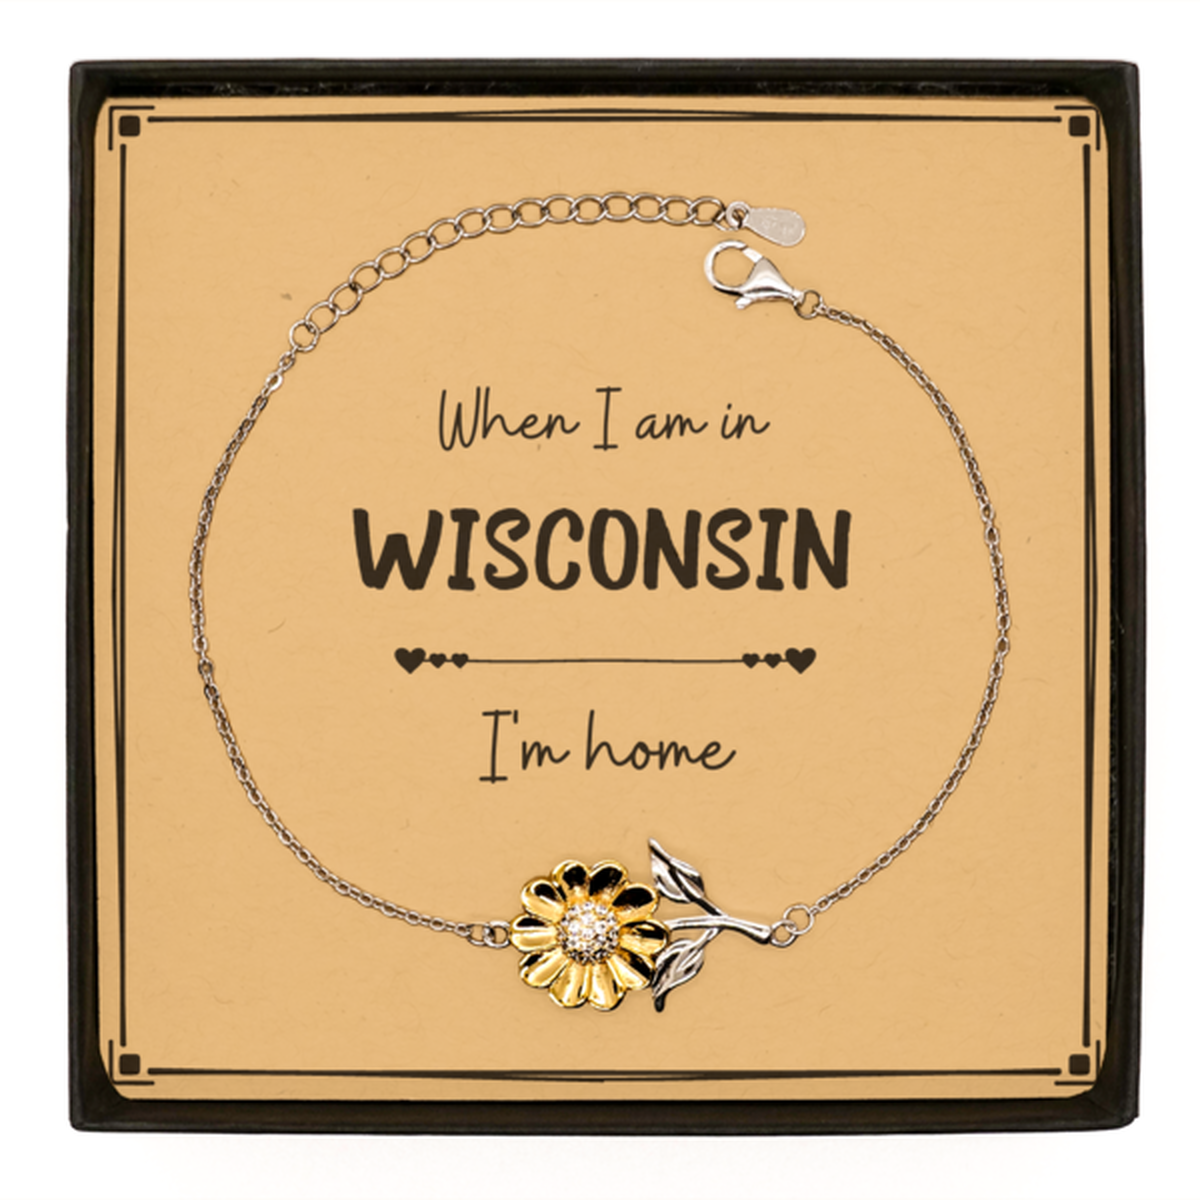 When I am in Wisconsin I'm home Sunflower Bracelet, Message Card Gifts For Wisconsin, State Wisconsin Birthday Gifts for Friends Coworker